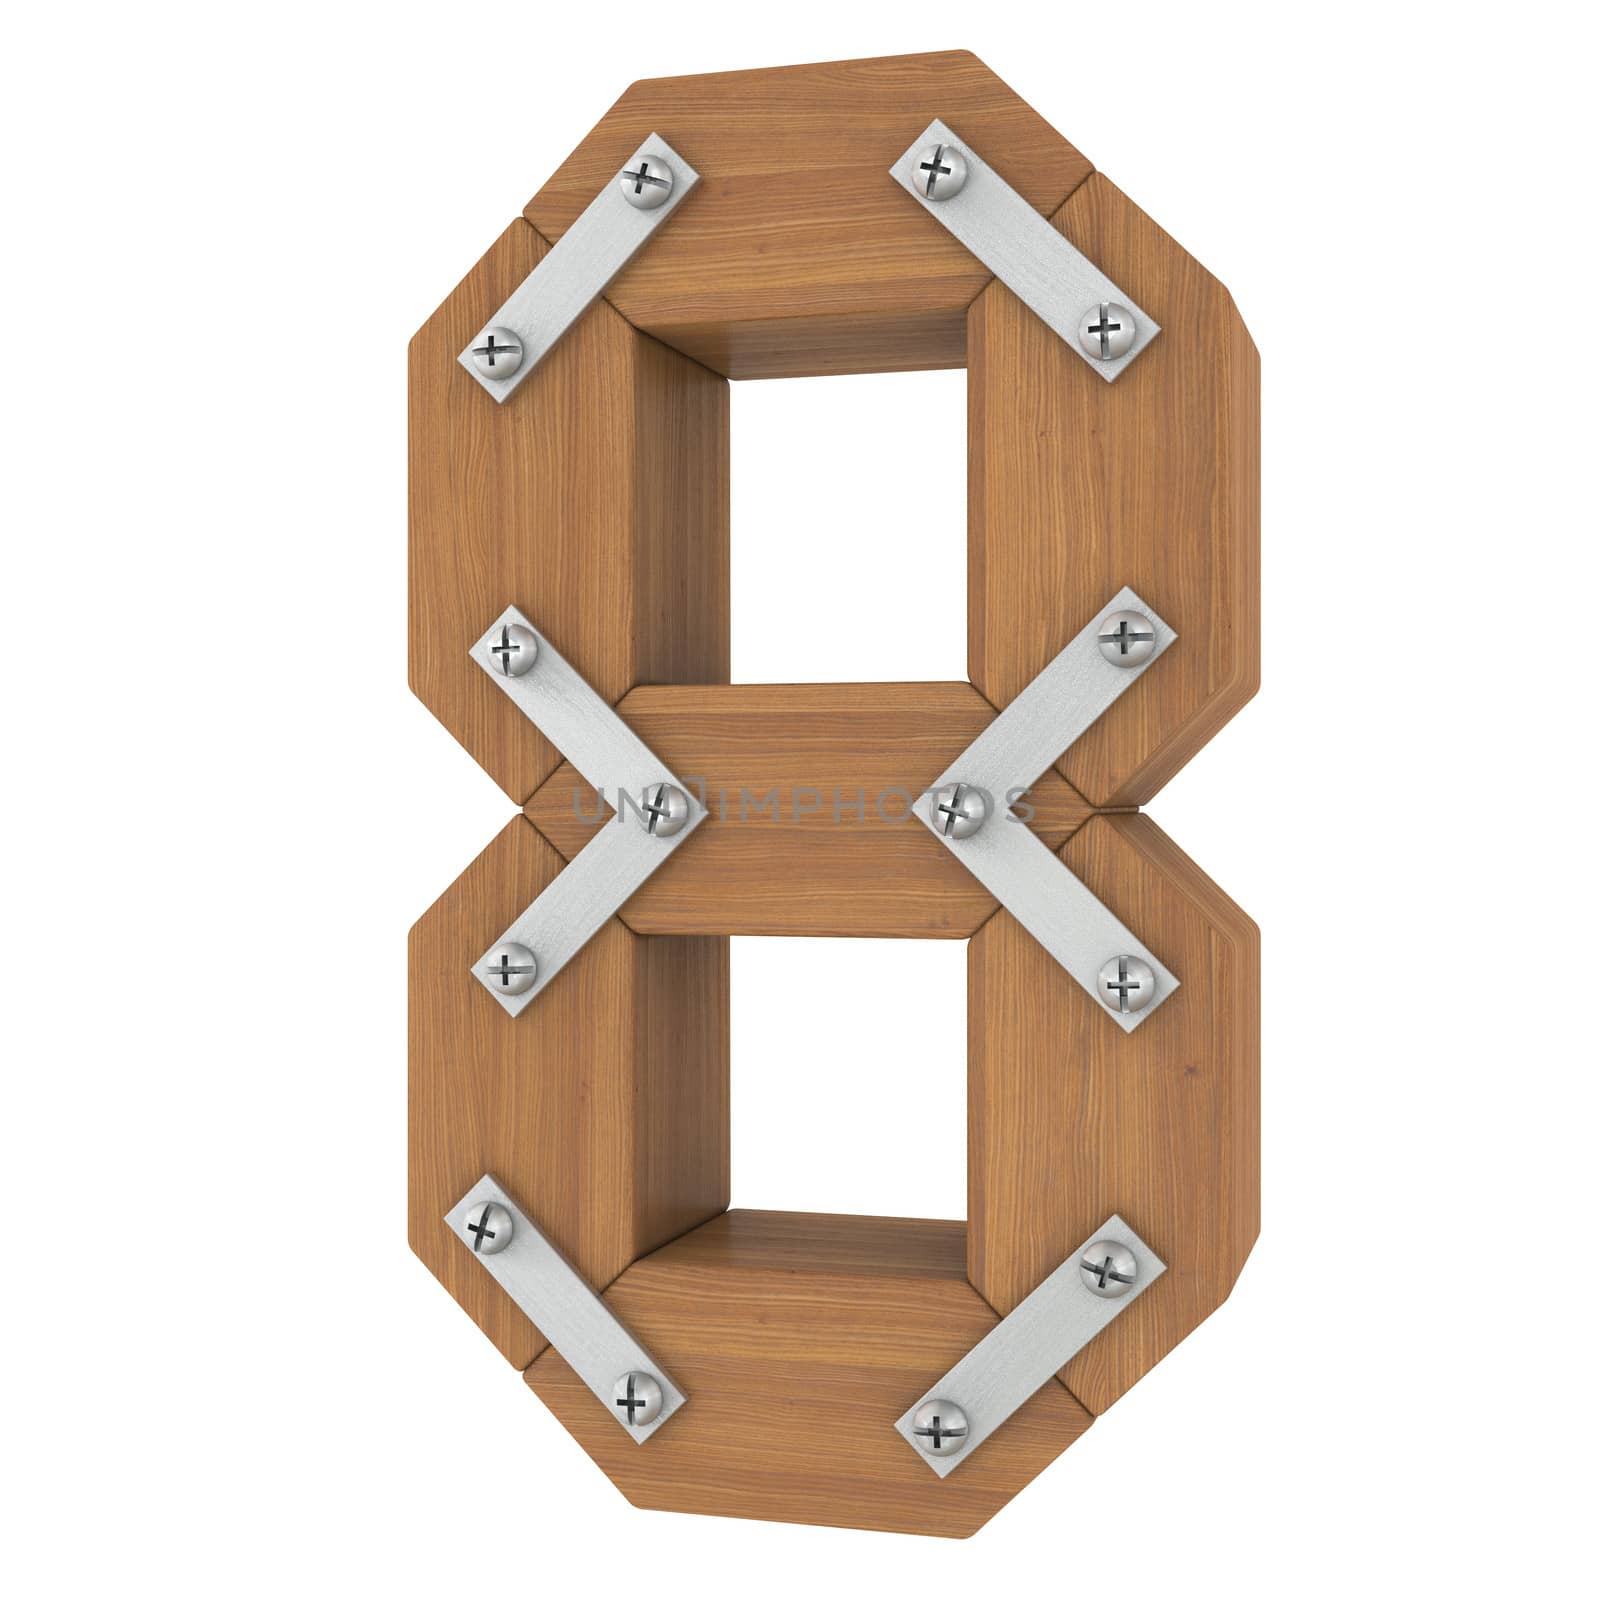 Wooden number eight. Isolated render on a white background